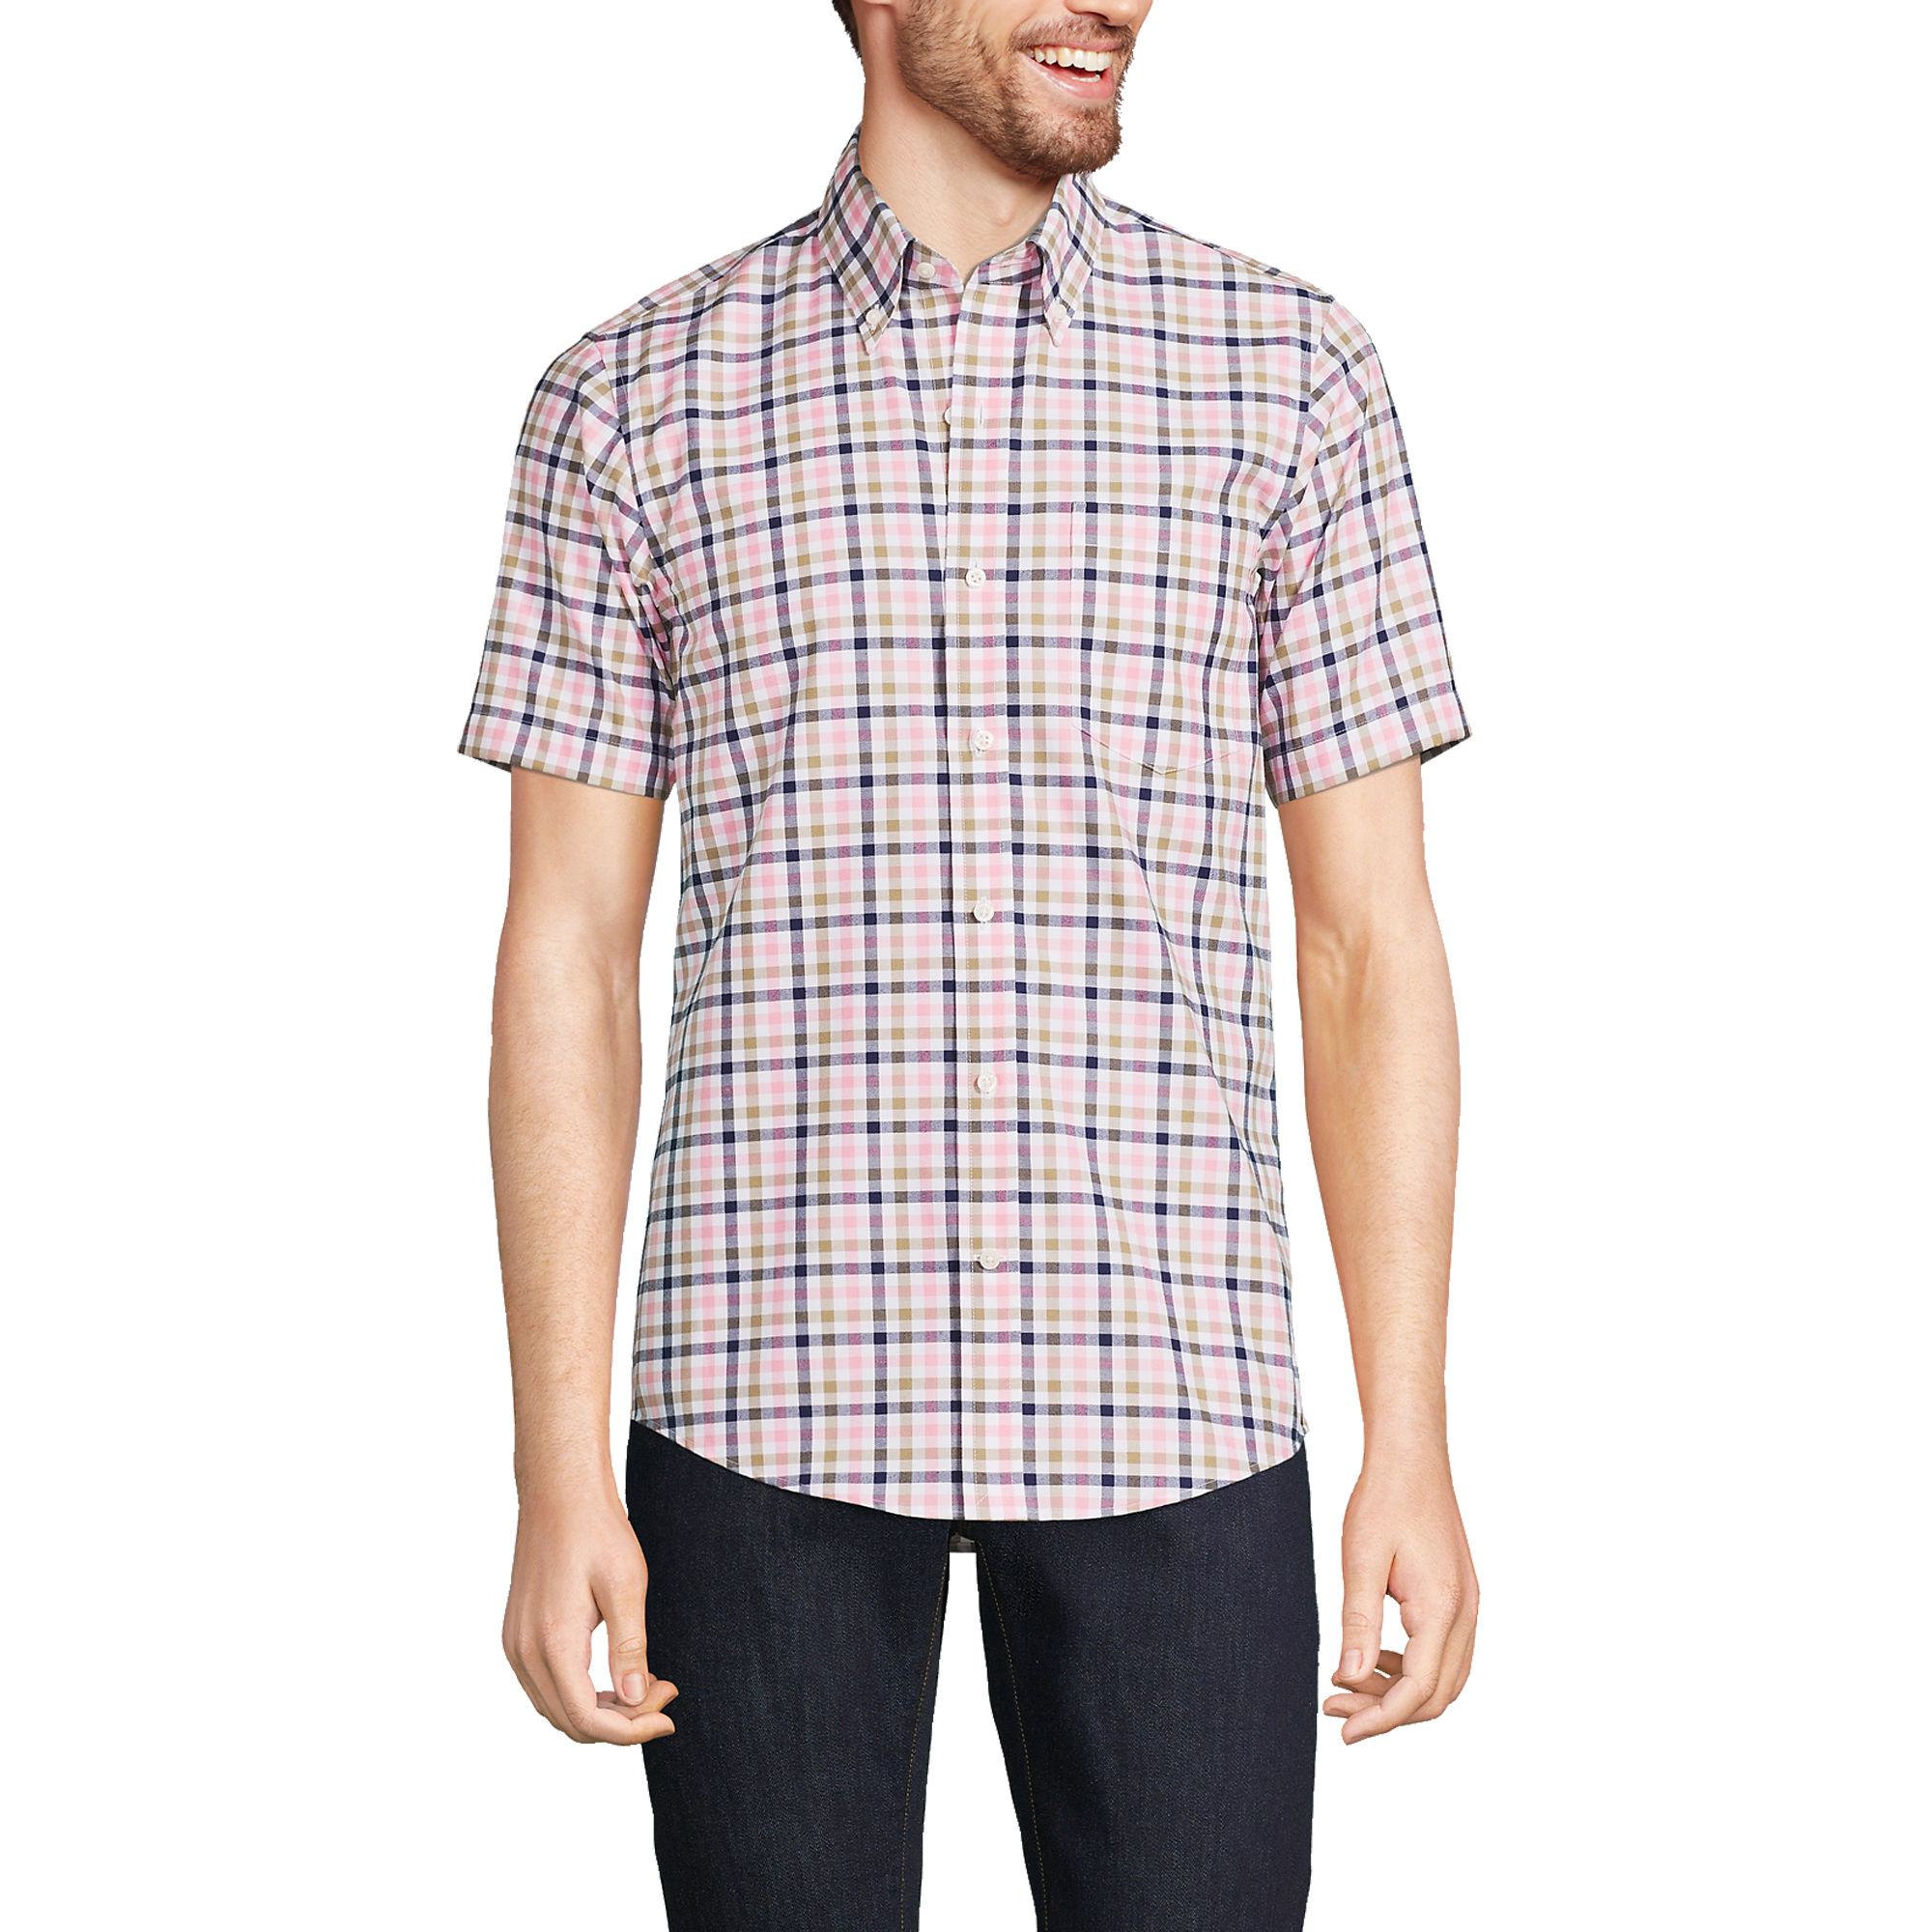 Lands End Men's Short Sleeve Traditional Fit No Iron Sportshirt (Pink Multi Check in various sizes)